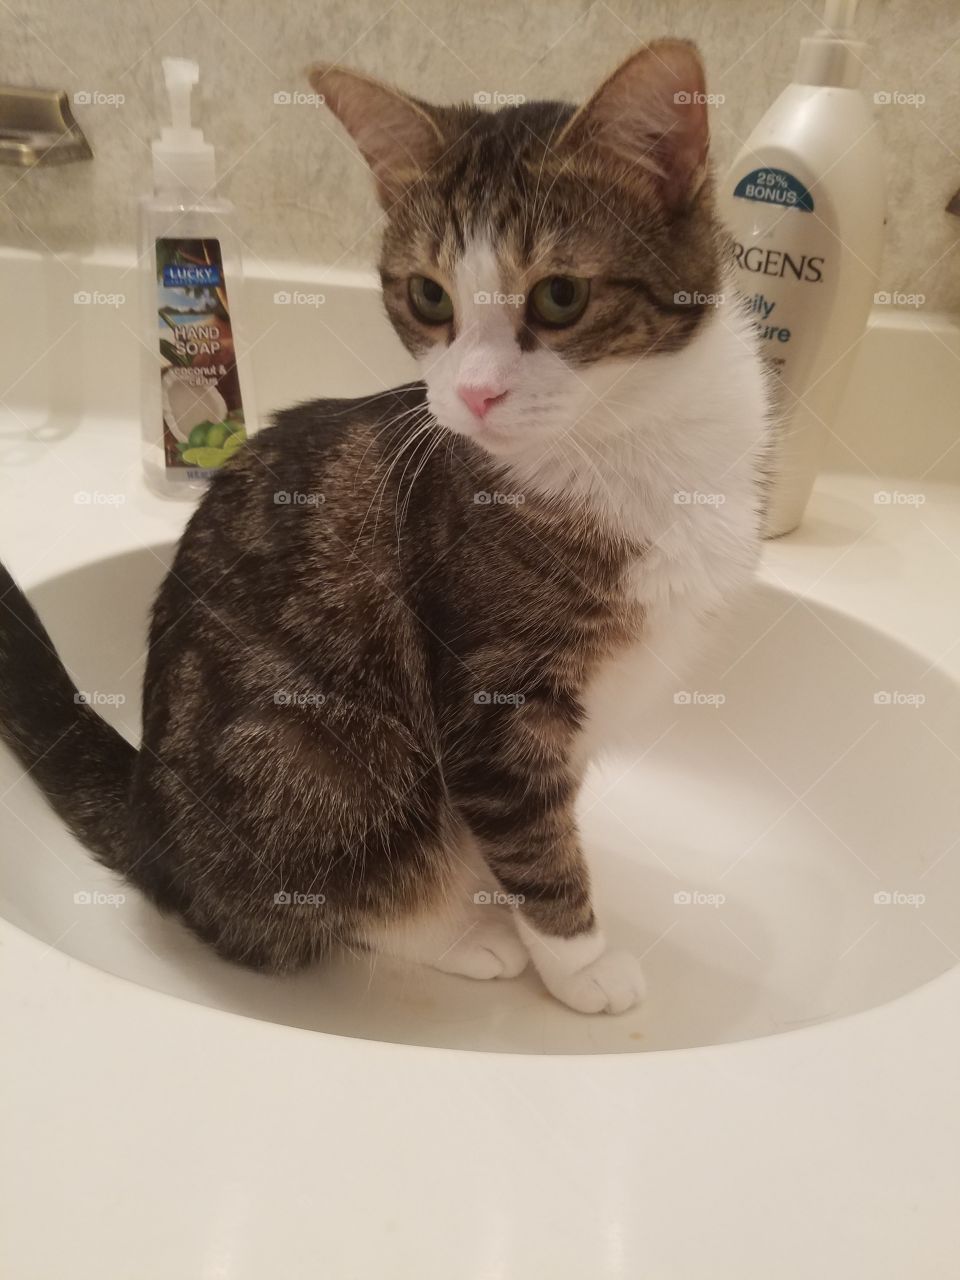 sink time